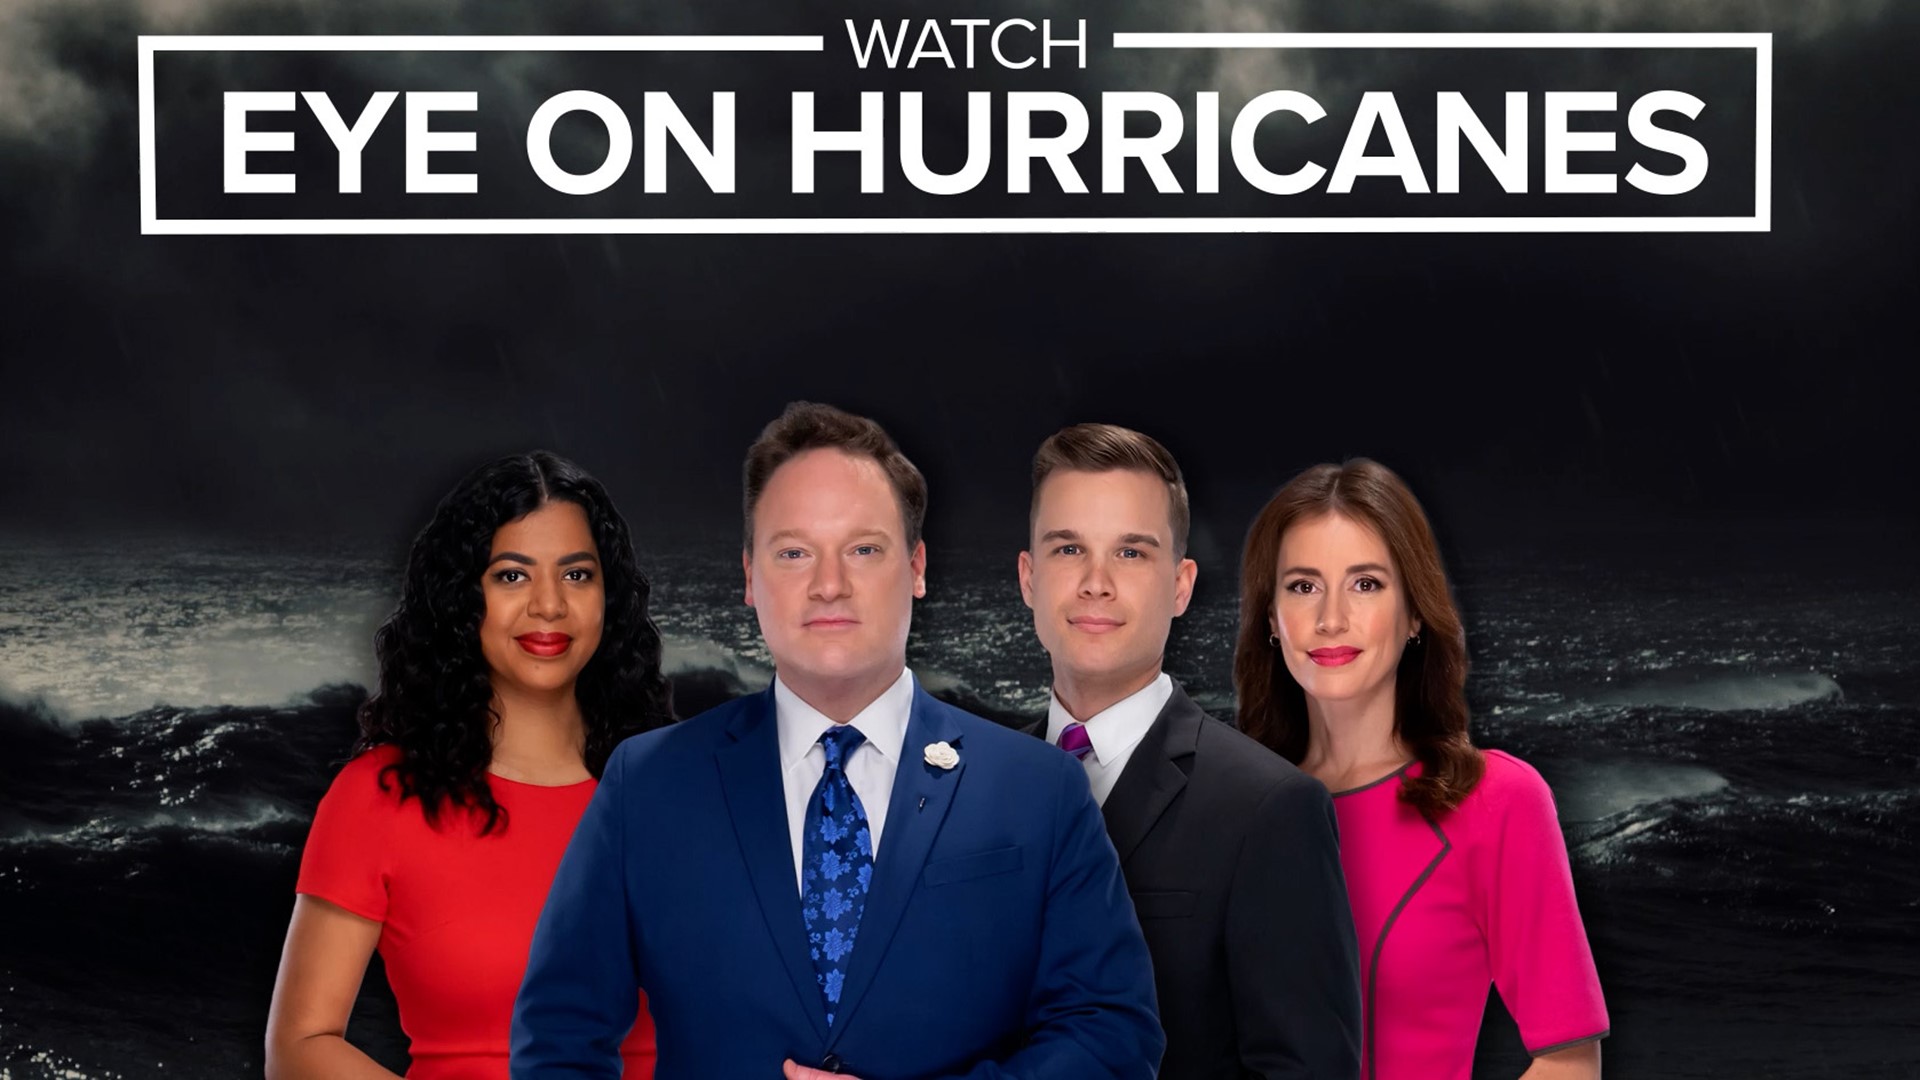 Your local weather experts take a look at the Hurricane Forecast for 2022 and break down what you need to know heading into the season.